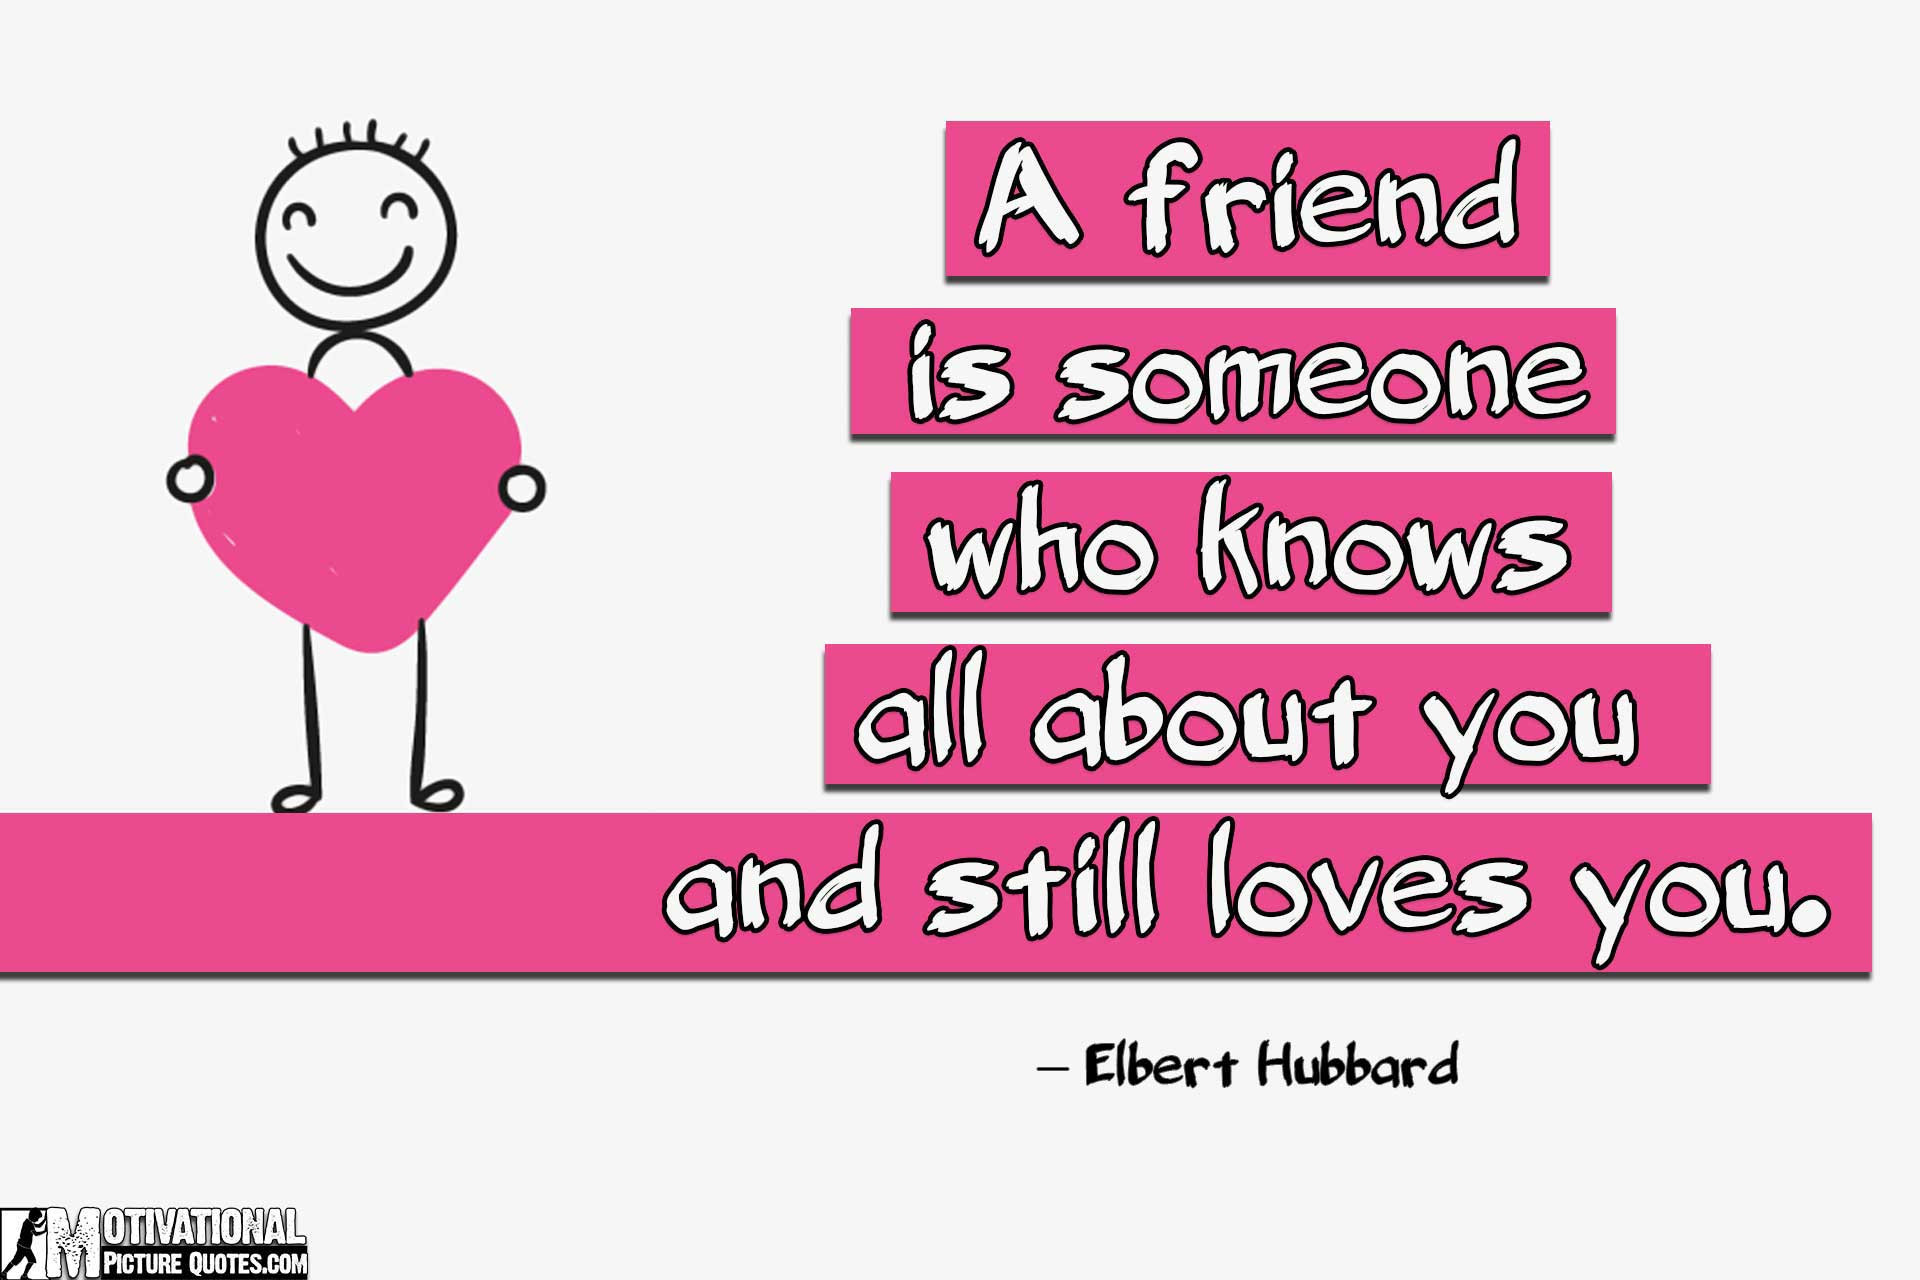 Inspirational Friend Quotes
 25 Inspirational Friendship Quotes